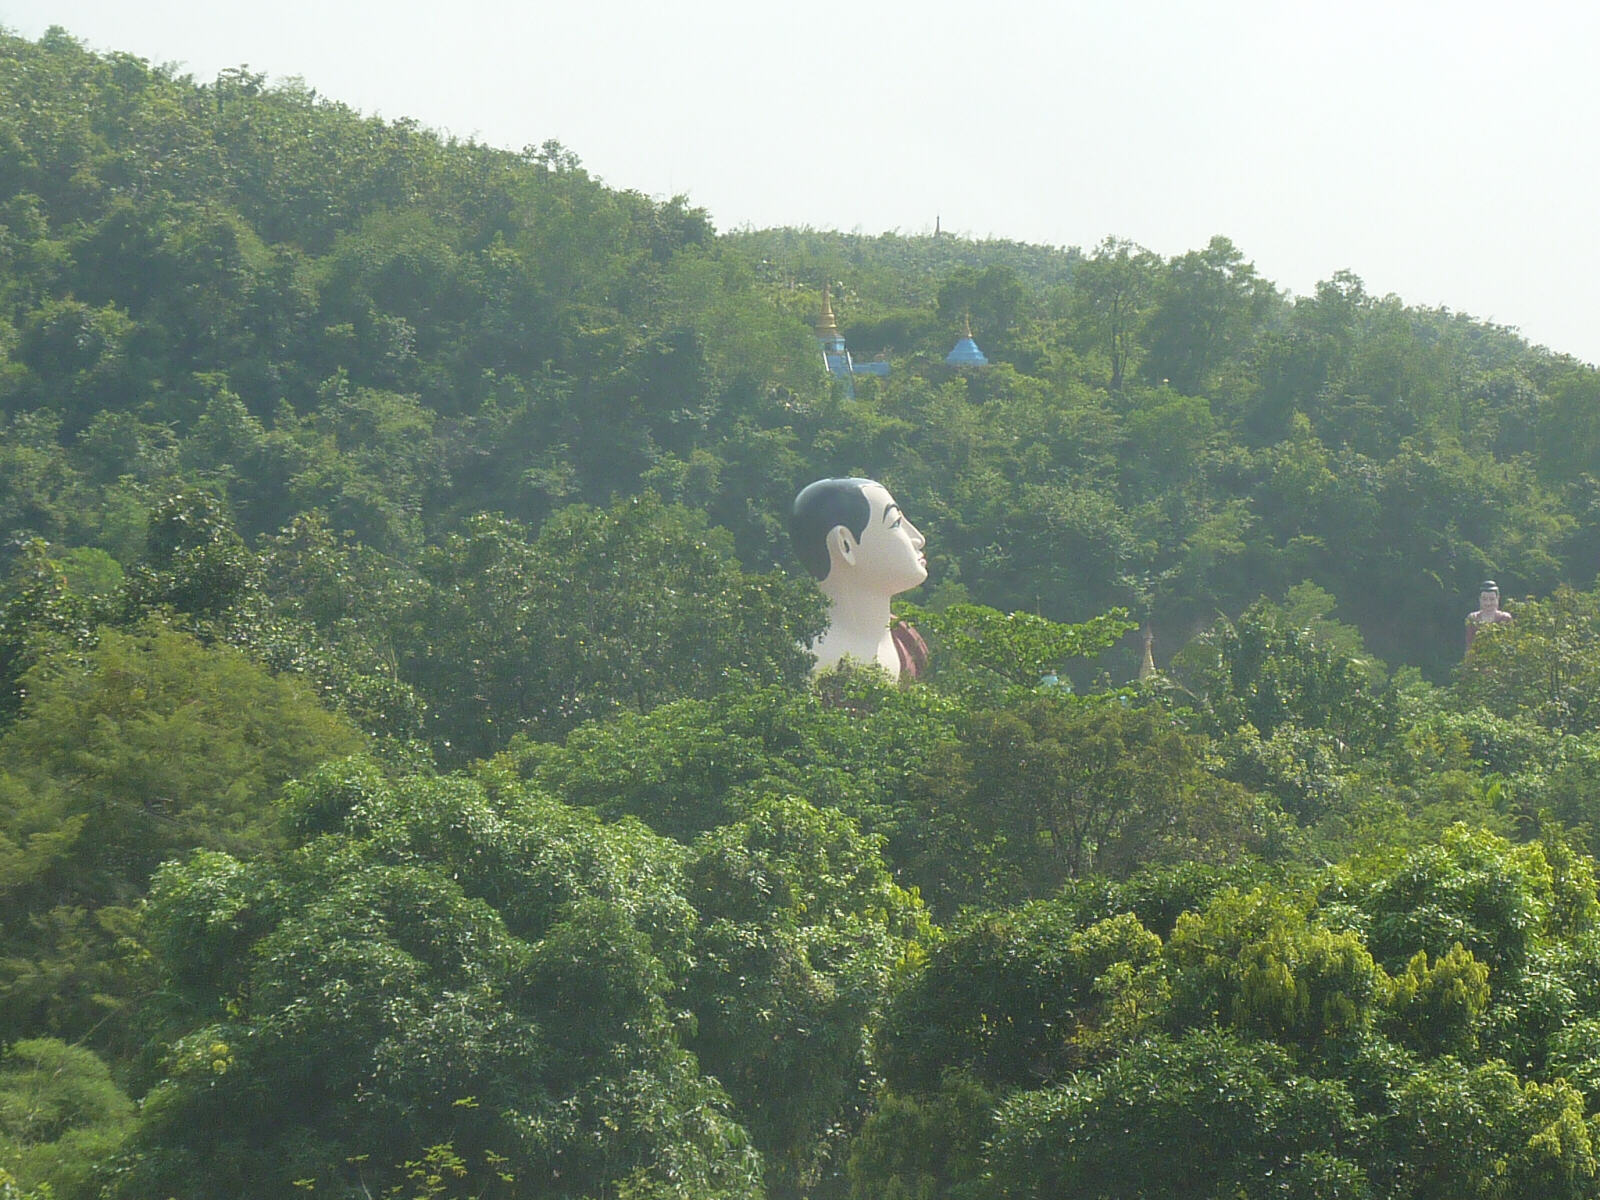 Giant Heads in the trees at Win Sein, Burma